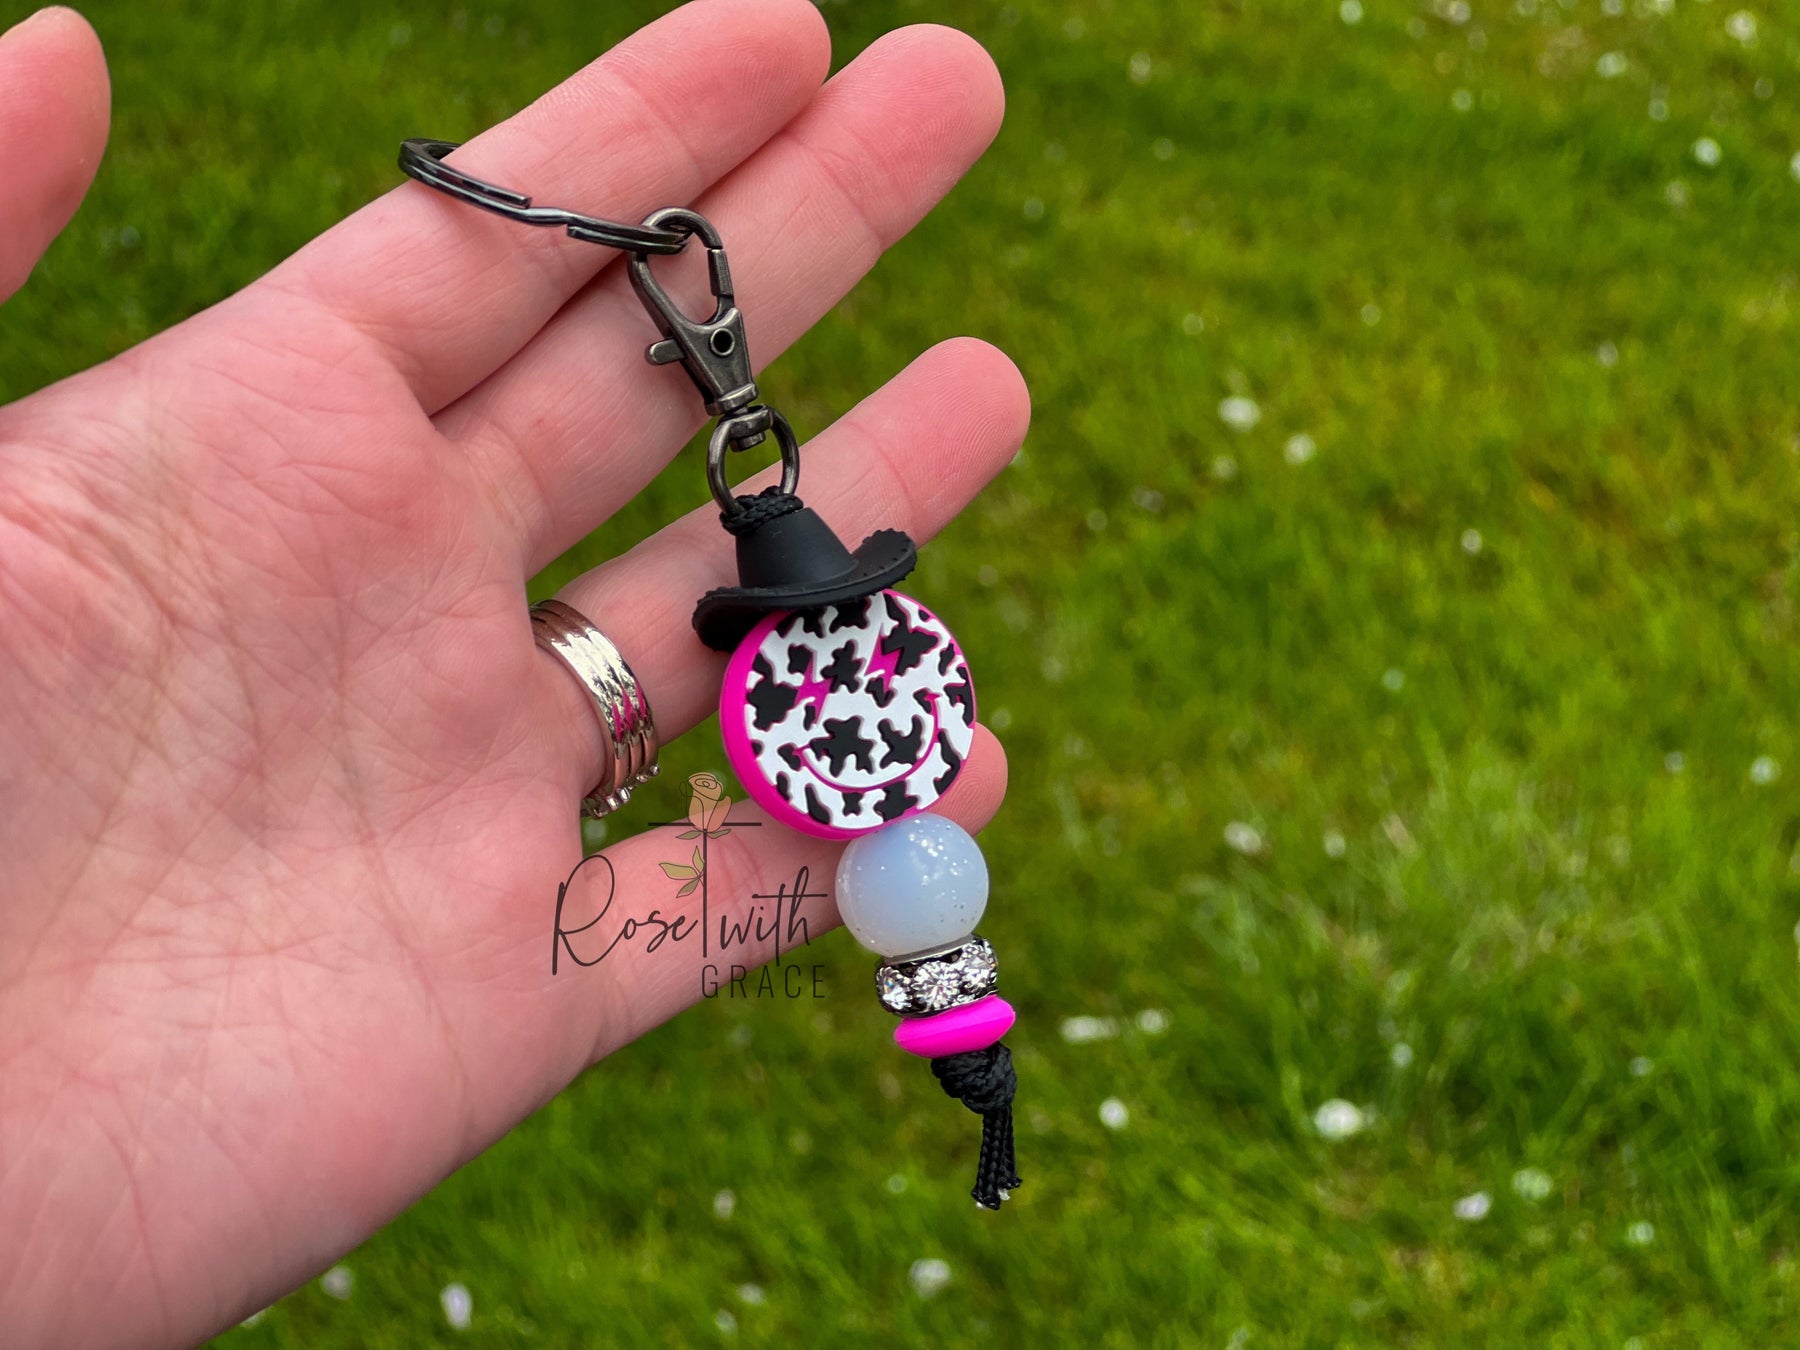 COWSTRUCK COWGIRL MINI KEYCHAIN Rose with Grace LLC